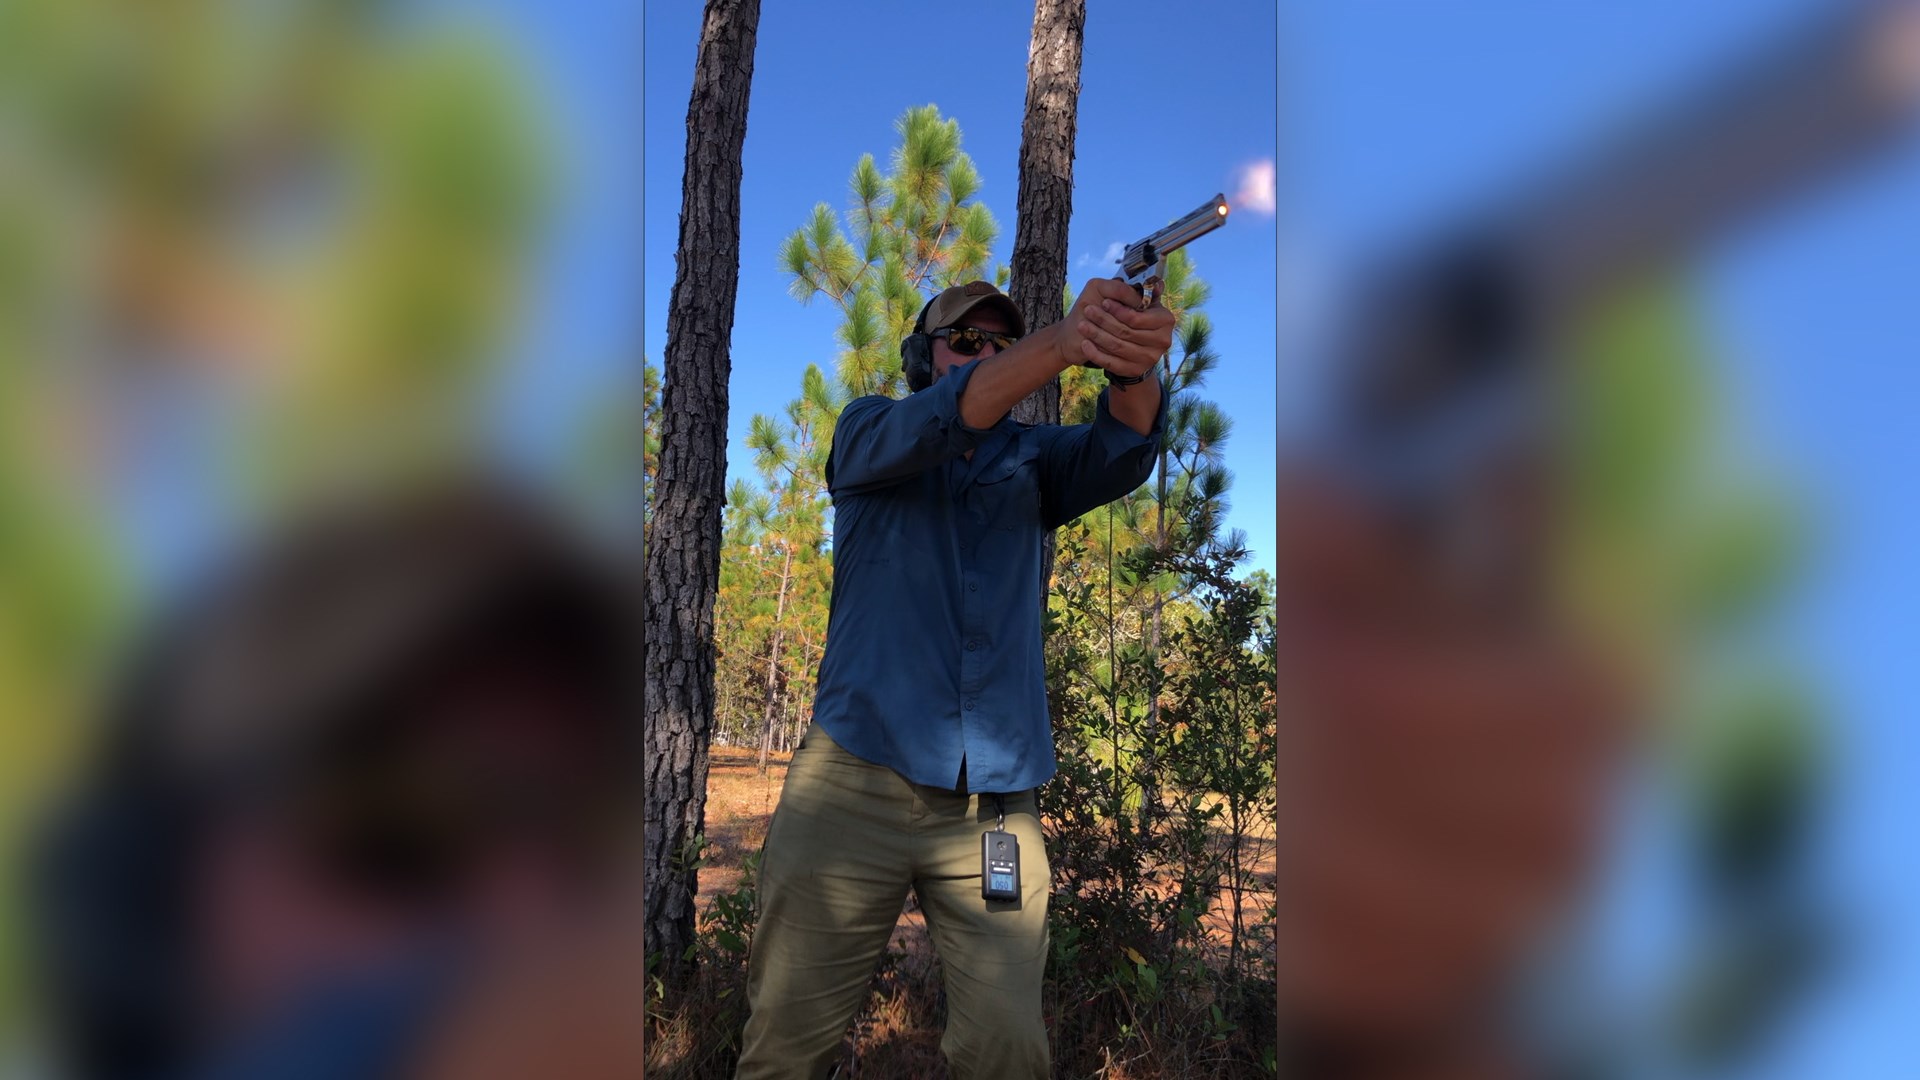 Author Justin Dyal outdoors shooting colt python revolver trees blue sky image overlay blurry background